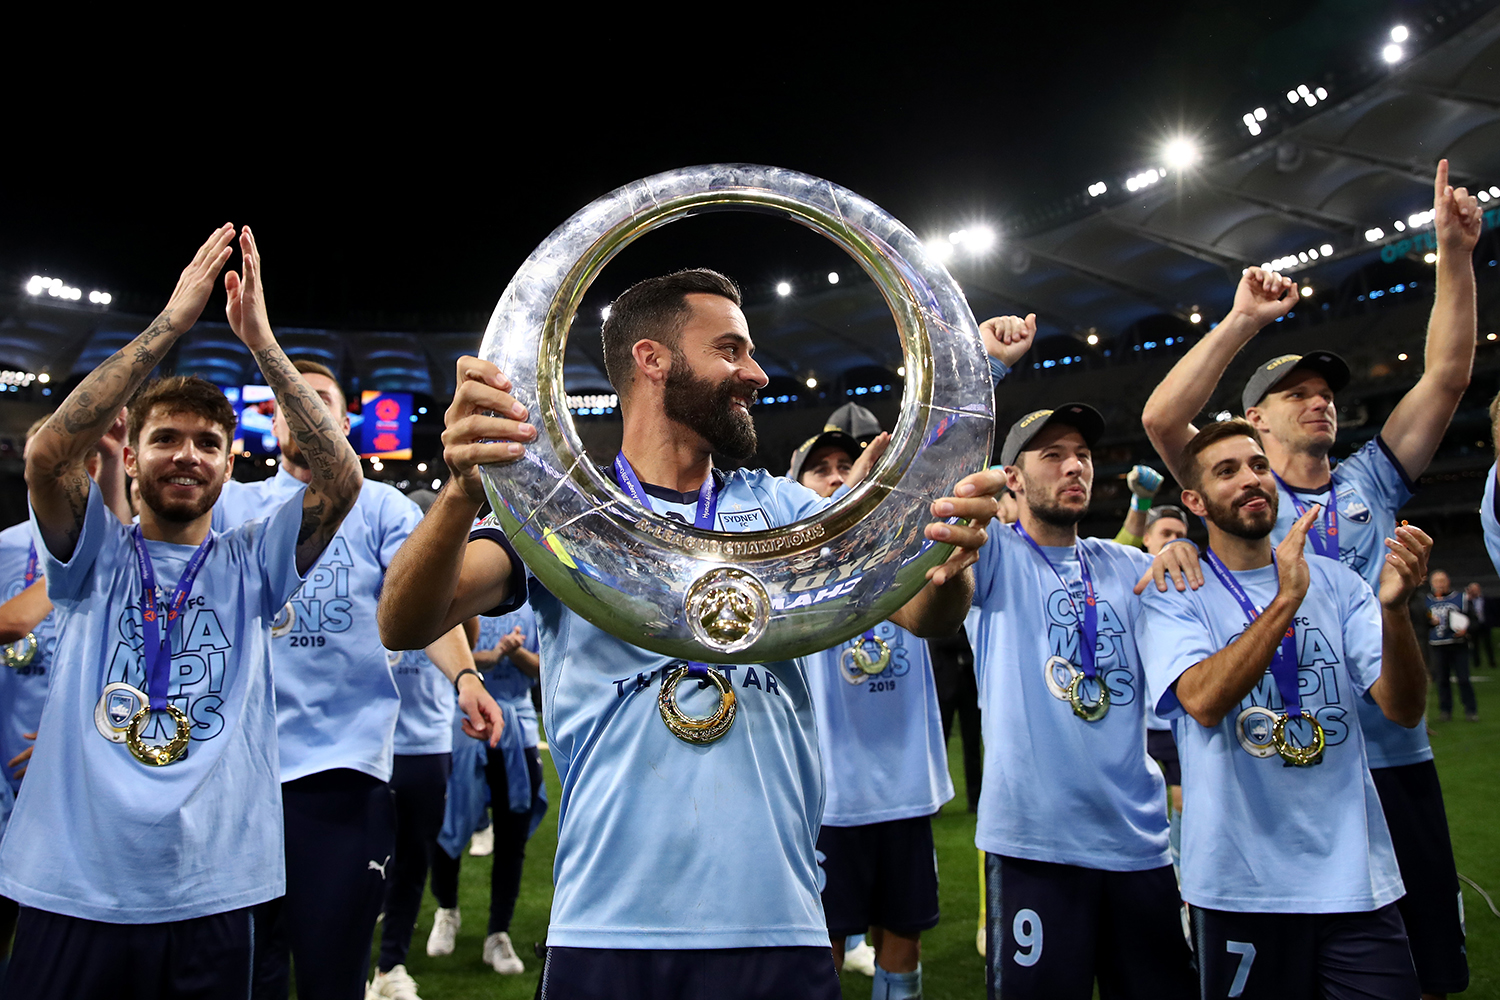 Brosque with the trophy